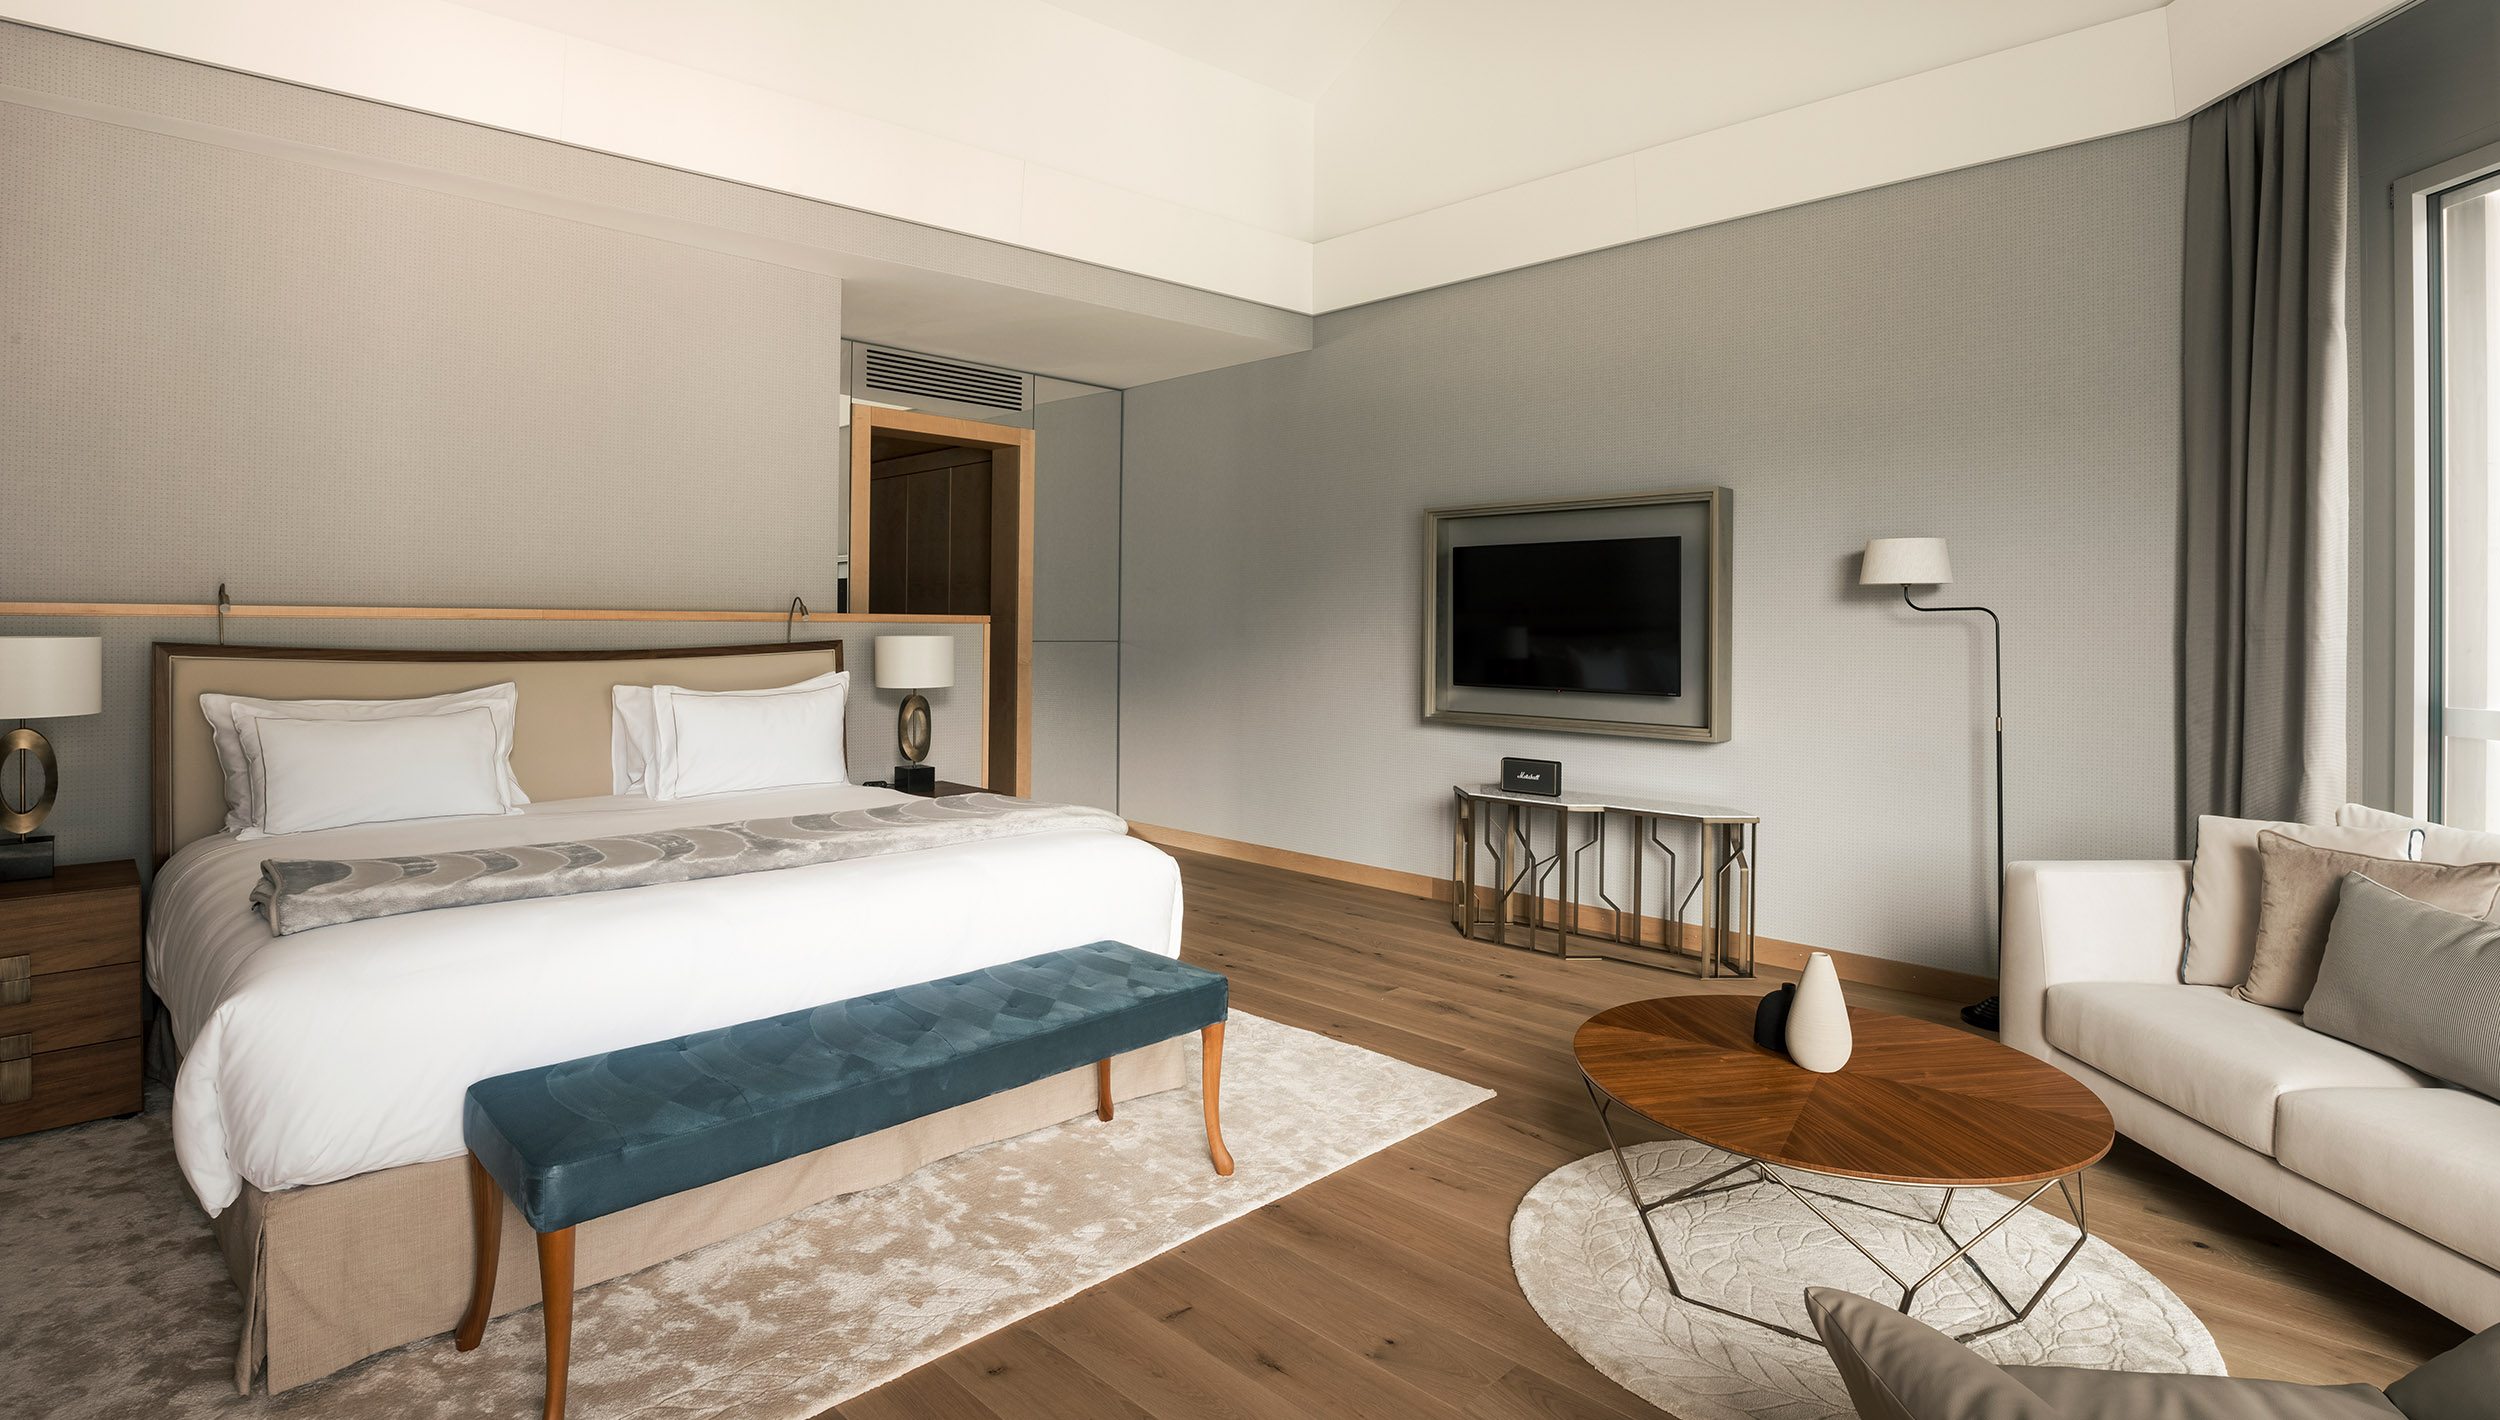 <h4>DOUBLE DELUXE</h4><p class="small">These rooms enjoy a large sitting area for end of the day relaxation with stunning views over Lake Lucerne and private balcony or terrace.</p>